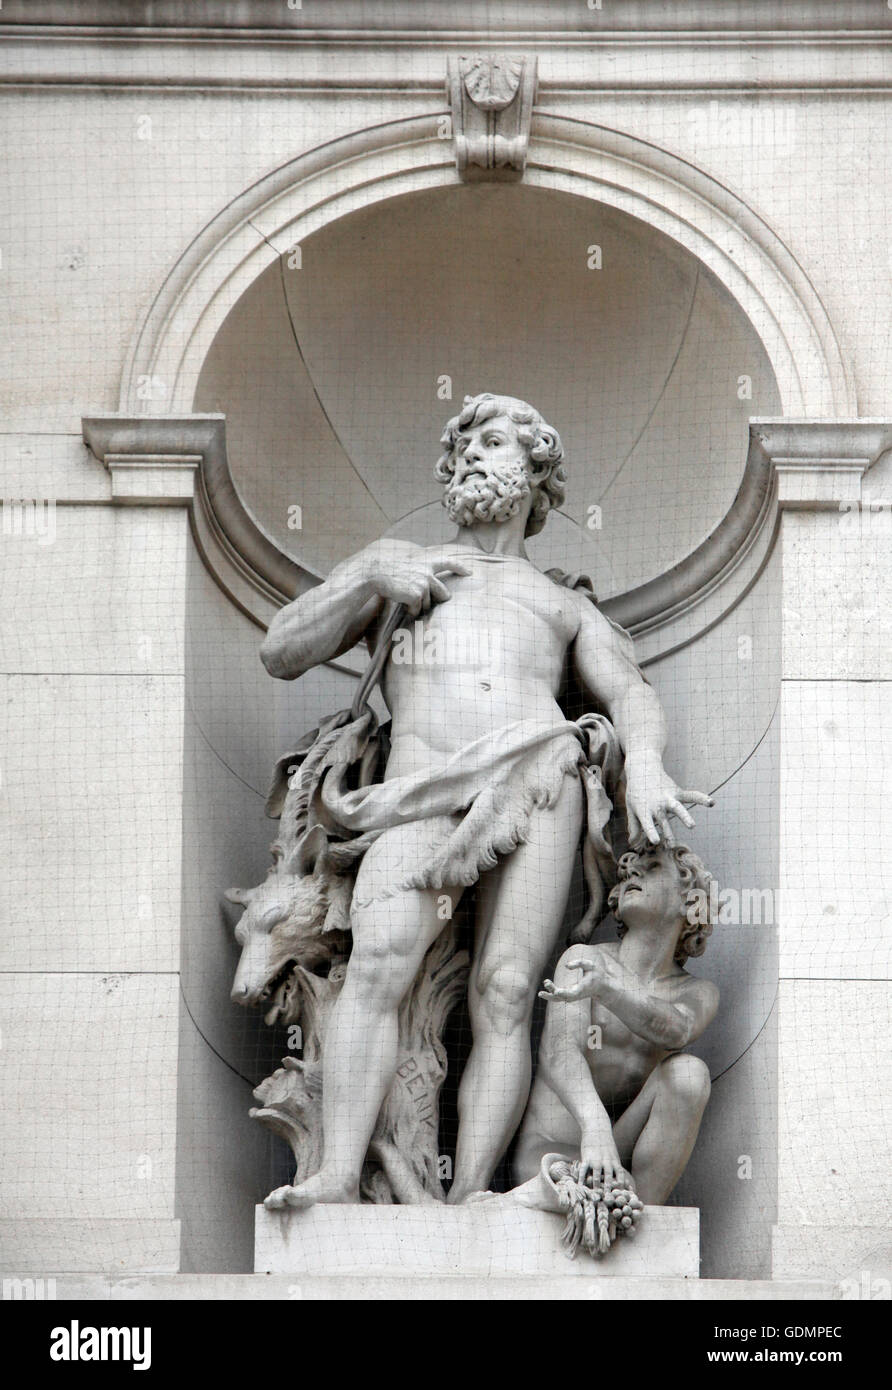 Burgtheater, Vienna, statue shows an allegory of egoism Stock Photo